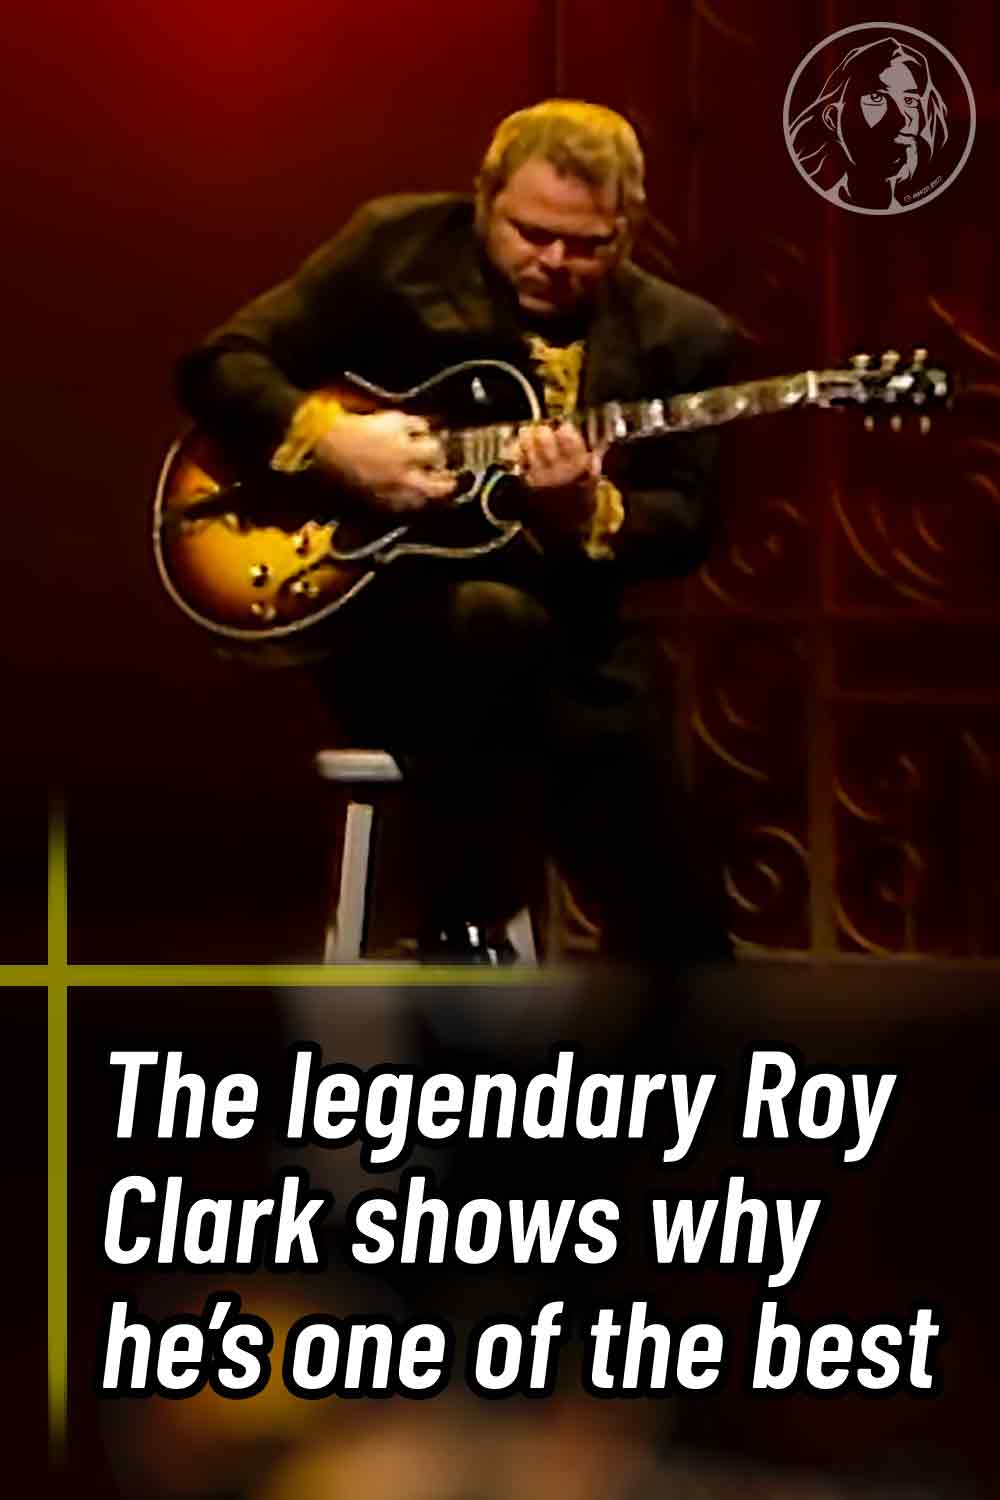 The legendary Roy Clark shows why he’s one of the best